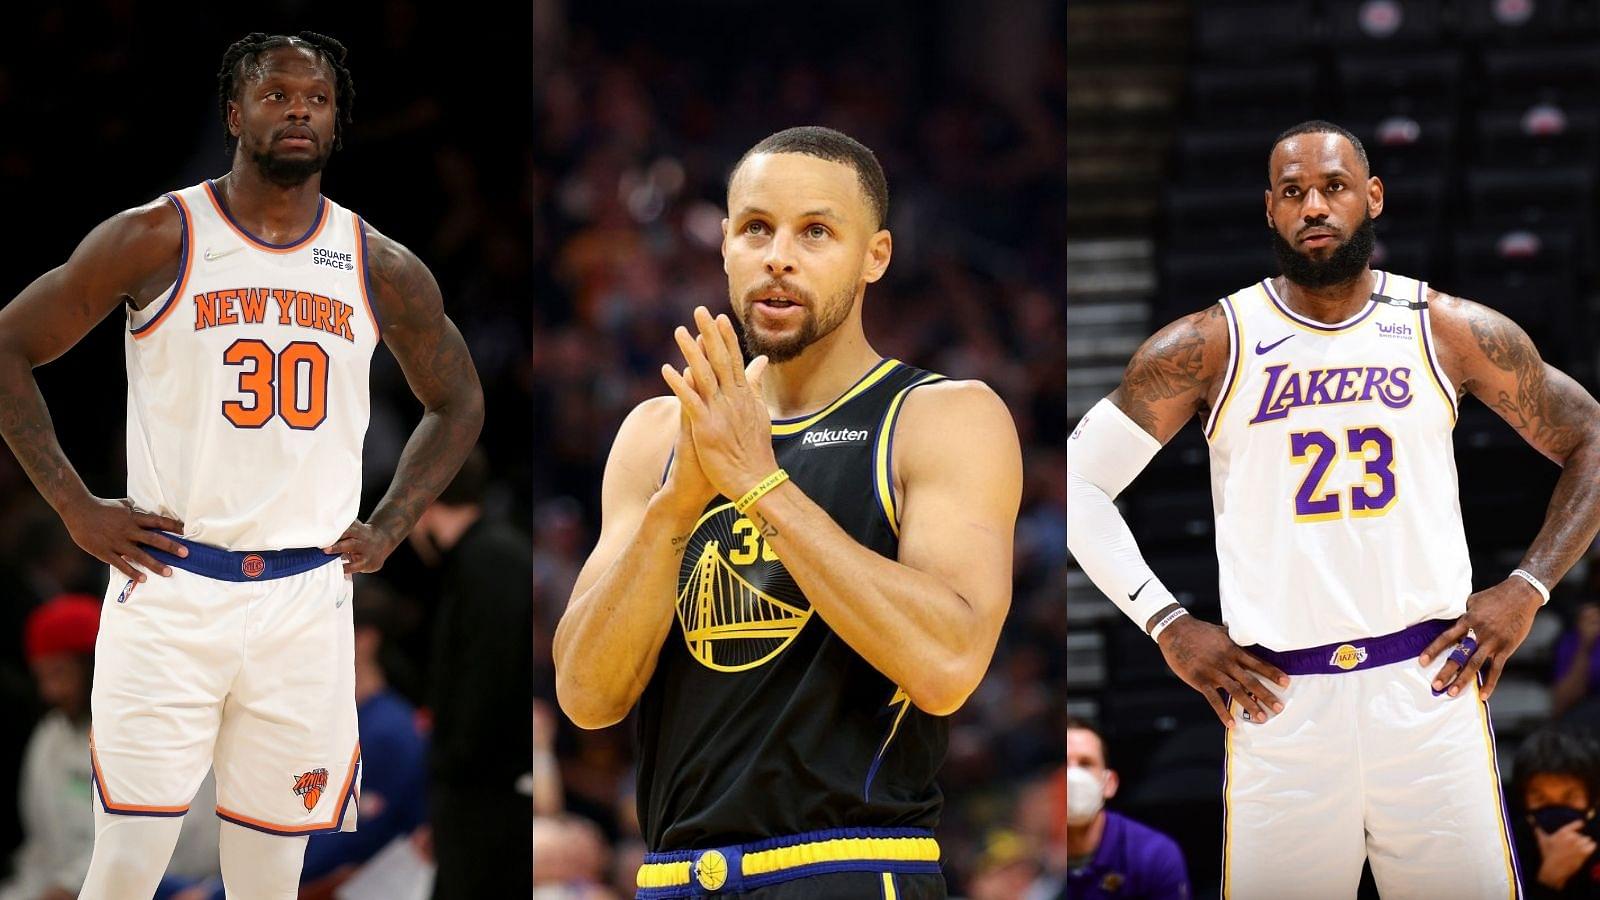 “Knicks at $5.8 billion, Warriors at $5.6 billion, and Lakers at $5.5 billion”: Julius Randle and Stephen Curry’s teams are more valuable than LeBron James’